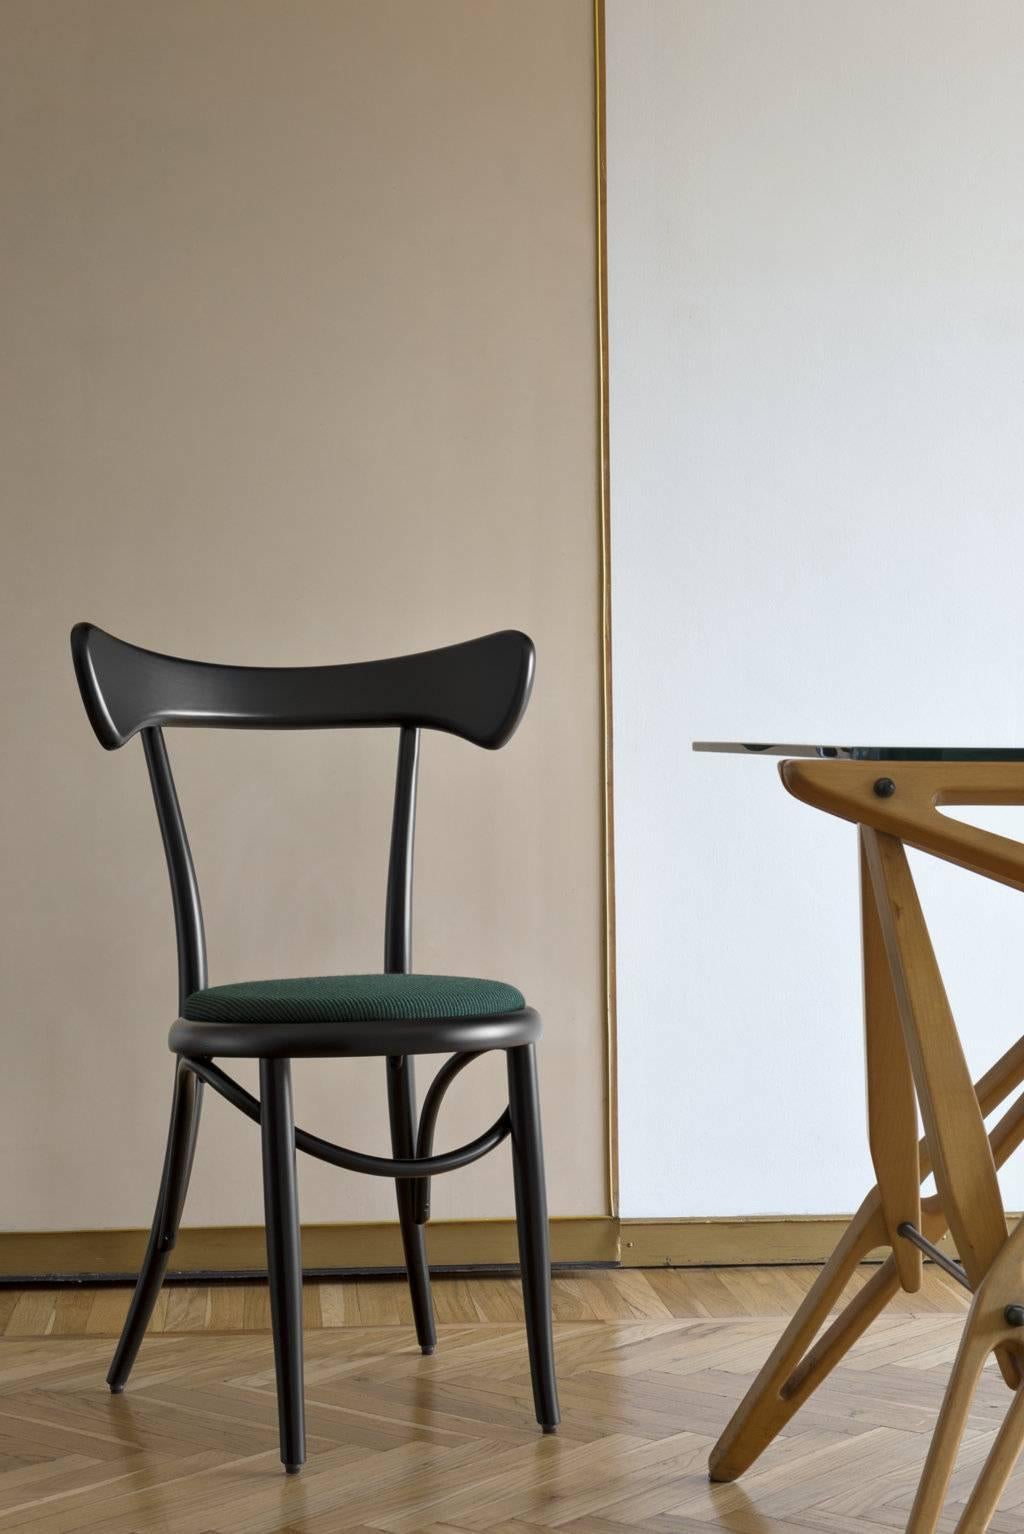 Drawing inspiration from the refined sinuosity of the Lehnstuhl lounge chair and Bodystuhl chair, Nigel Coates brings us the Caféstuhl chair, an original interpretation of the Thonet tradition with a contemporary twist. This is an extremely